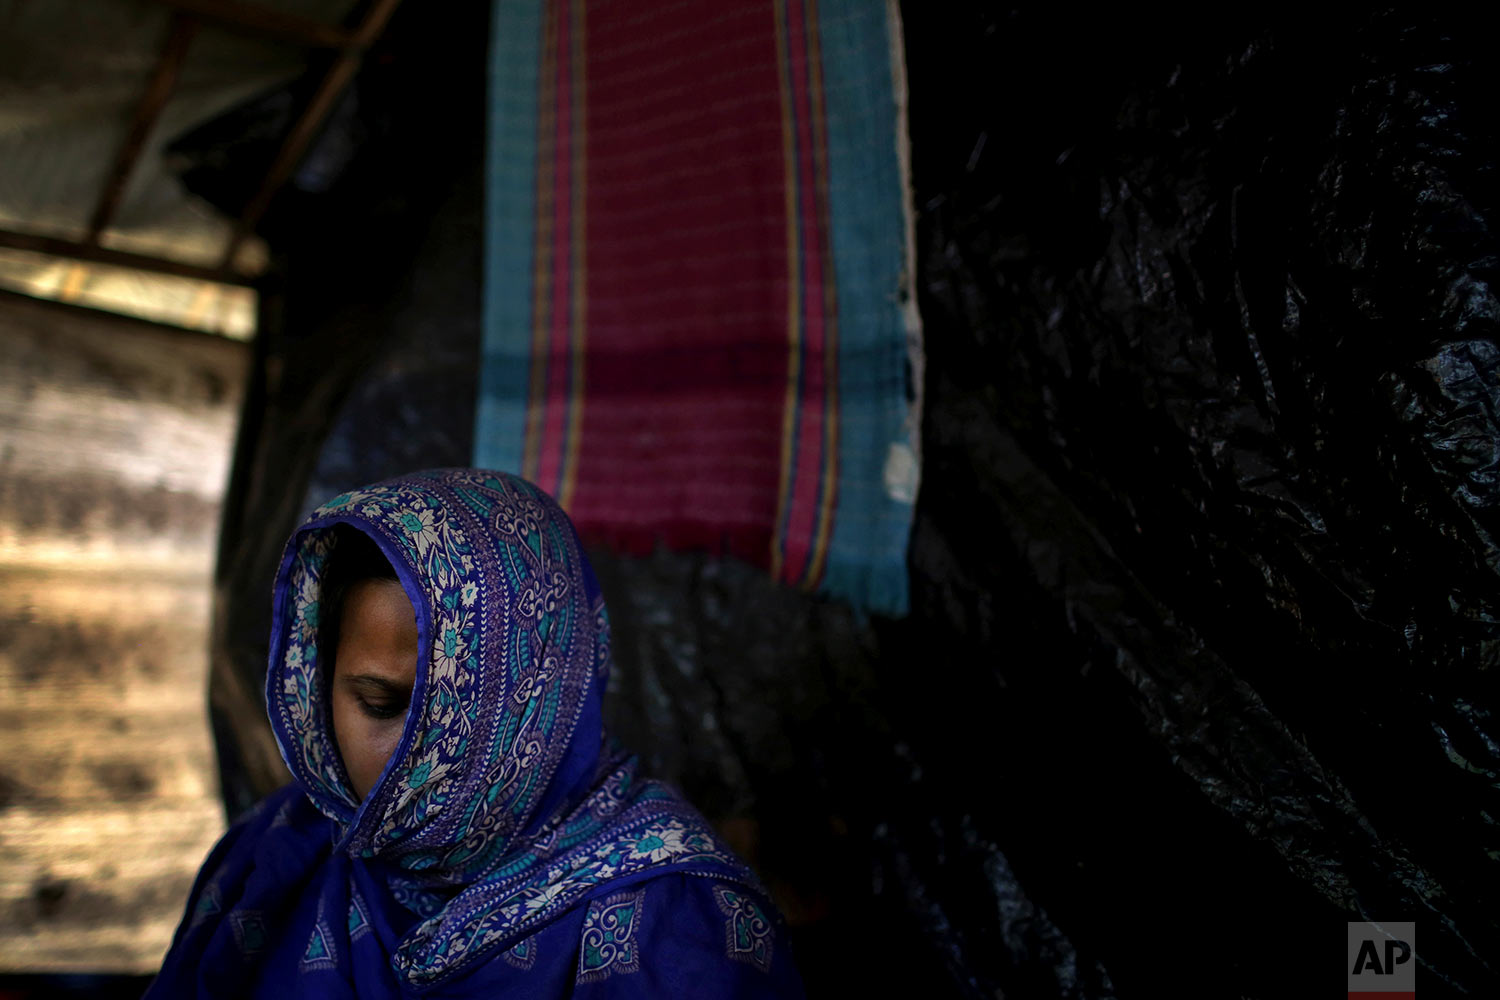  In this Monday, Nov. 20, 2017, photo, M, 35, mother of three, who says she was raped by members of Myanmar's armed forces in late August, is photographed in her friend's tent in Kutupalong refugee camp in Bangladesh.  (AP Photo/Wong Maye-E)

 